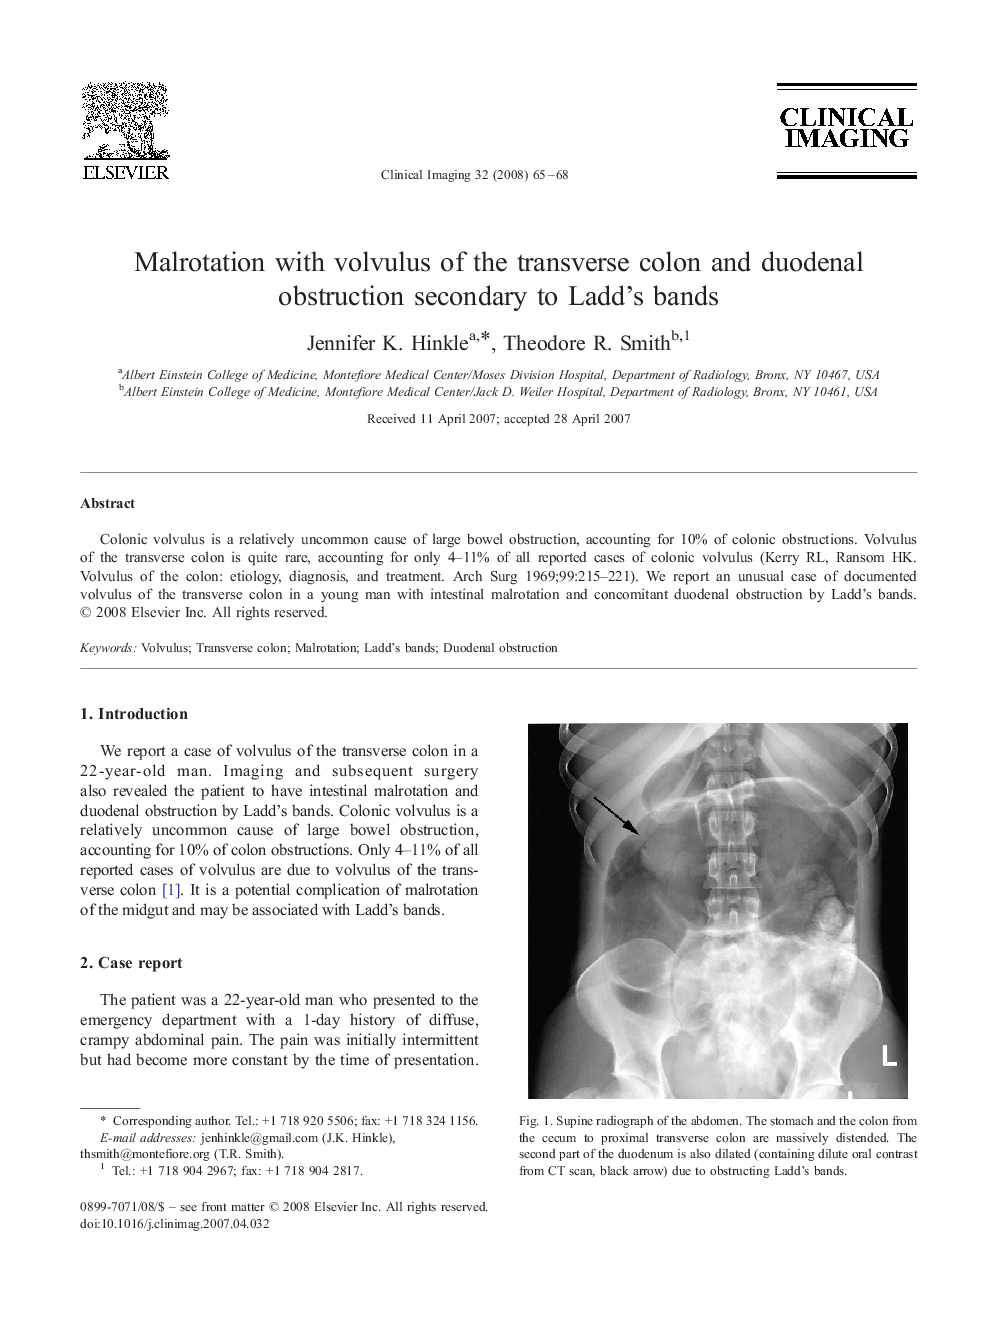 Malrotation with volvulus of the transverse colon and duodenal obstruction secondary to Ladd's bands